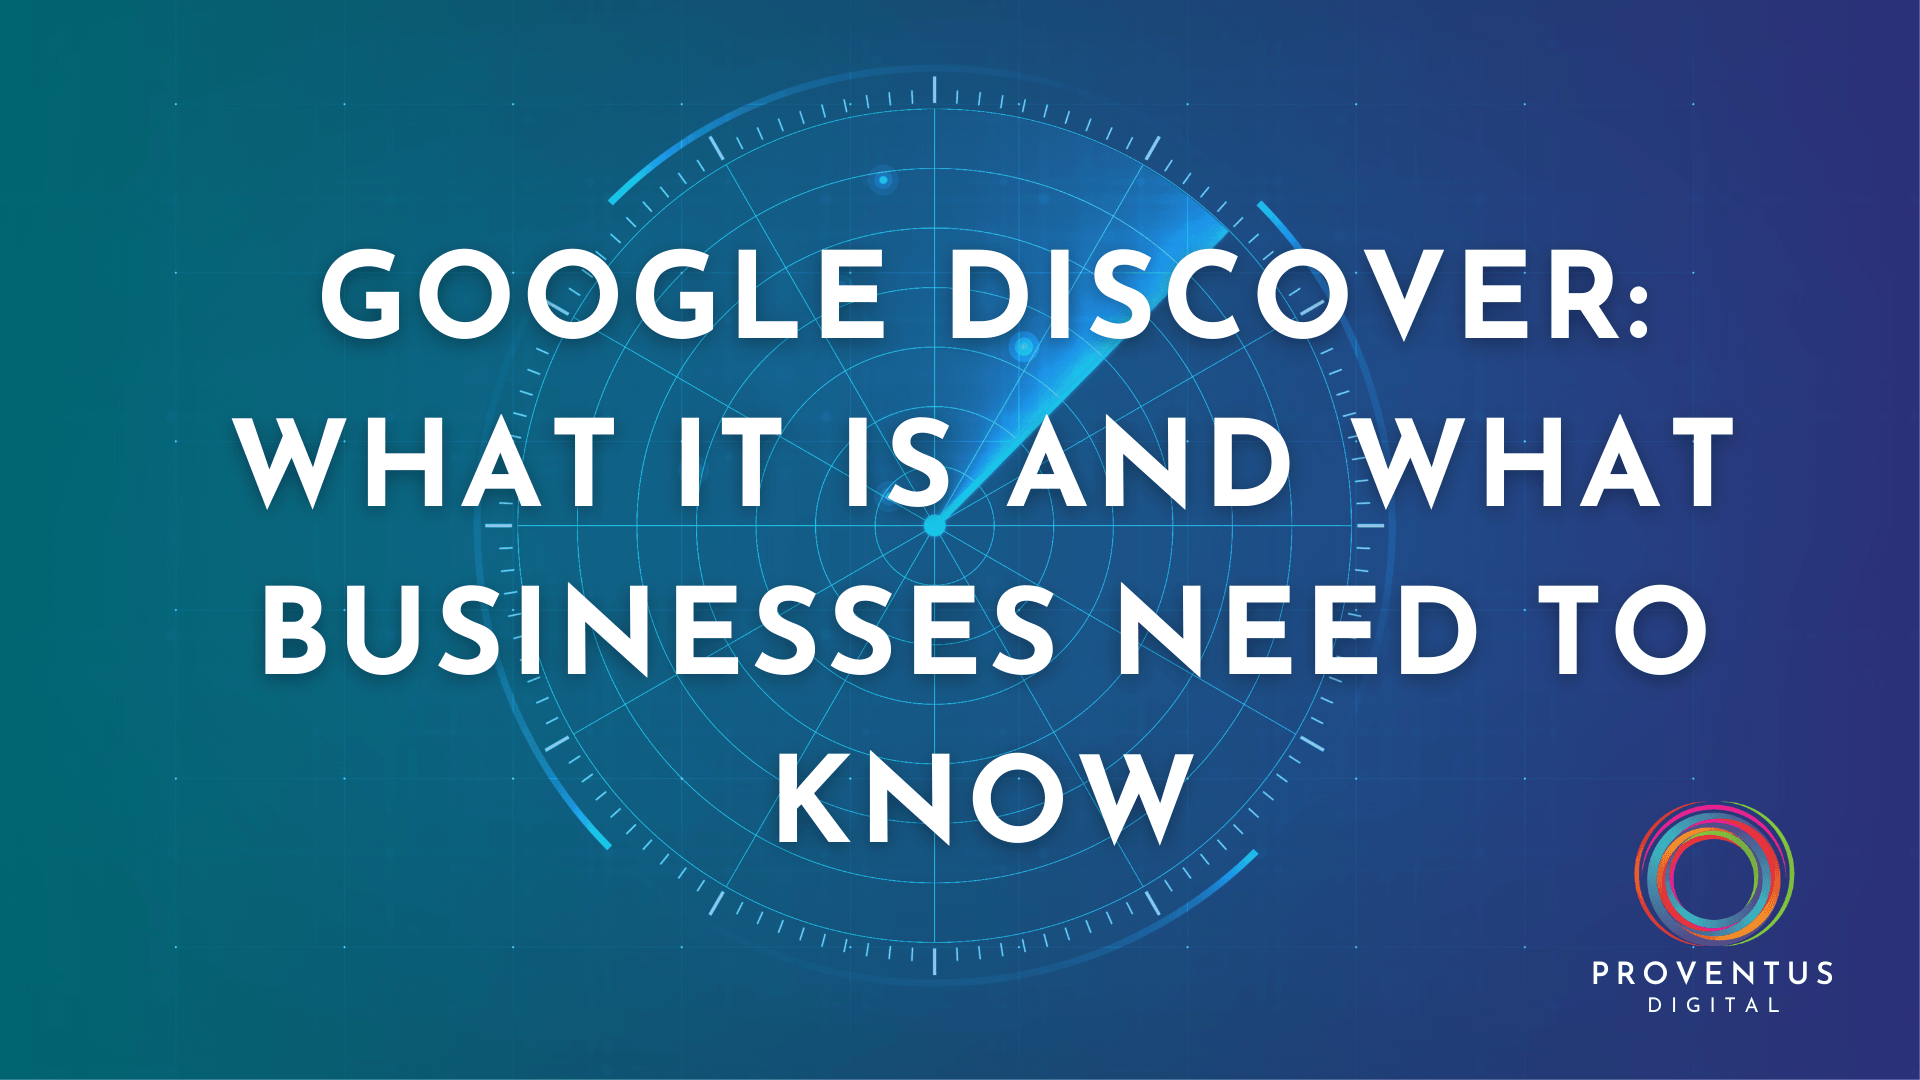 Google Discover: What It Is and What Businesses Need to Know